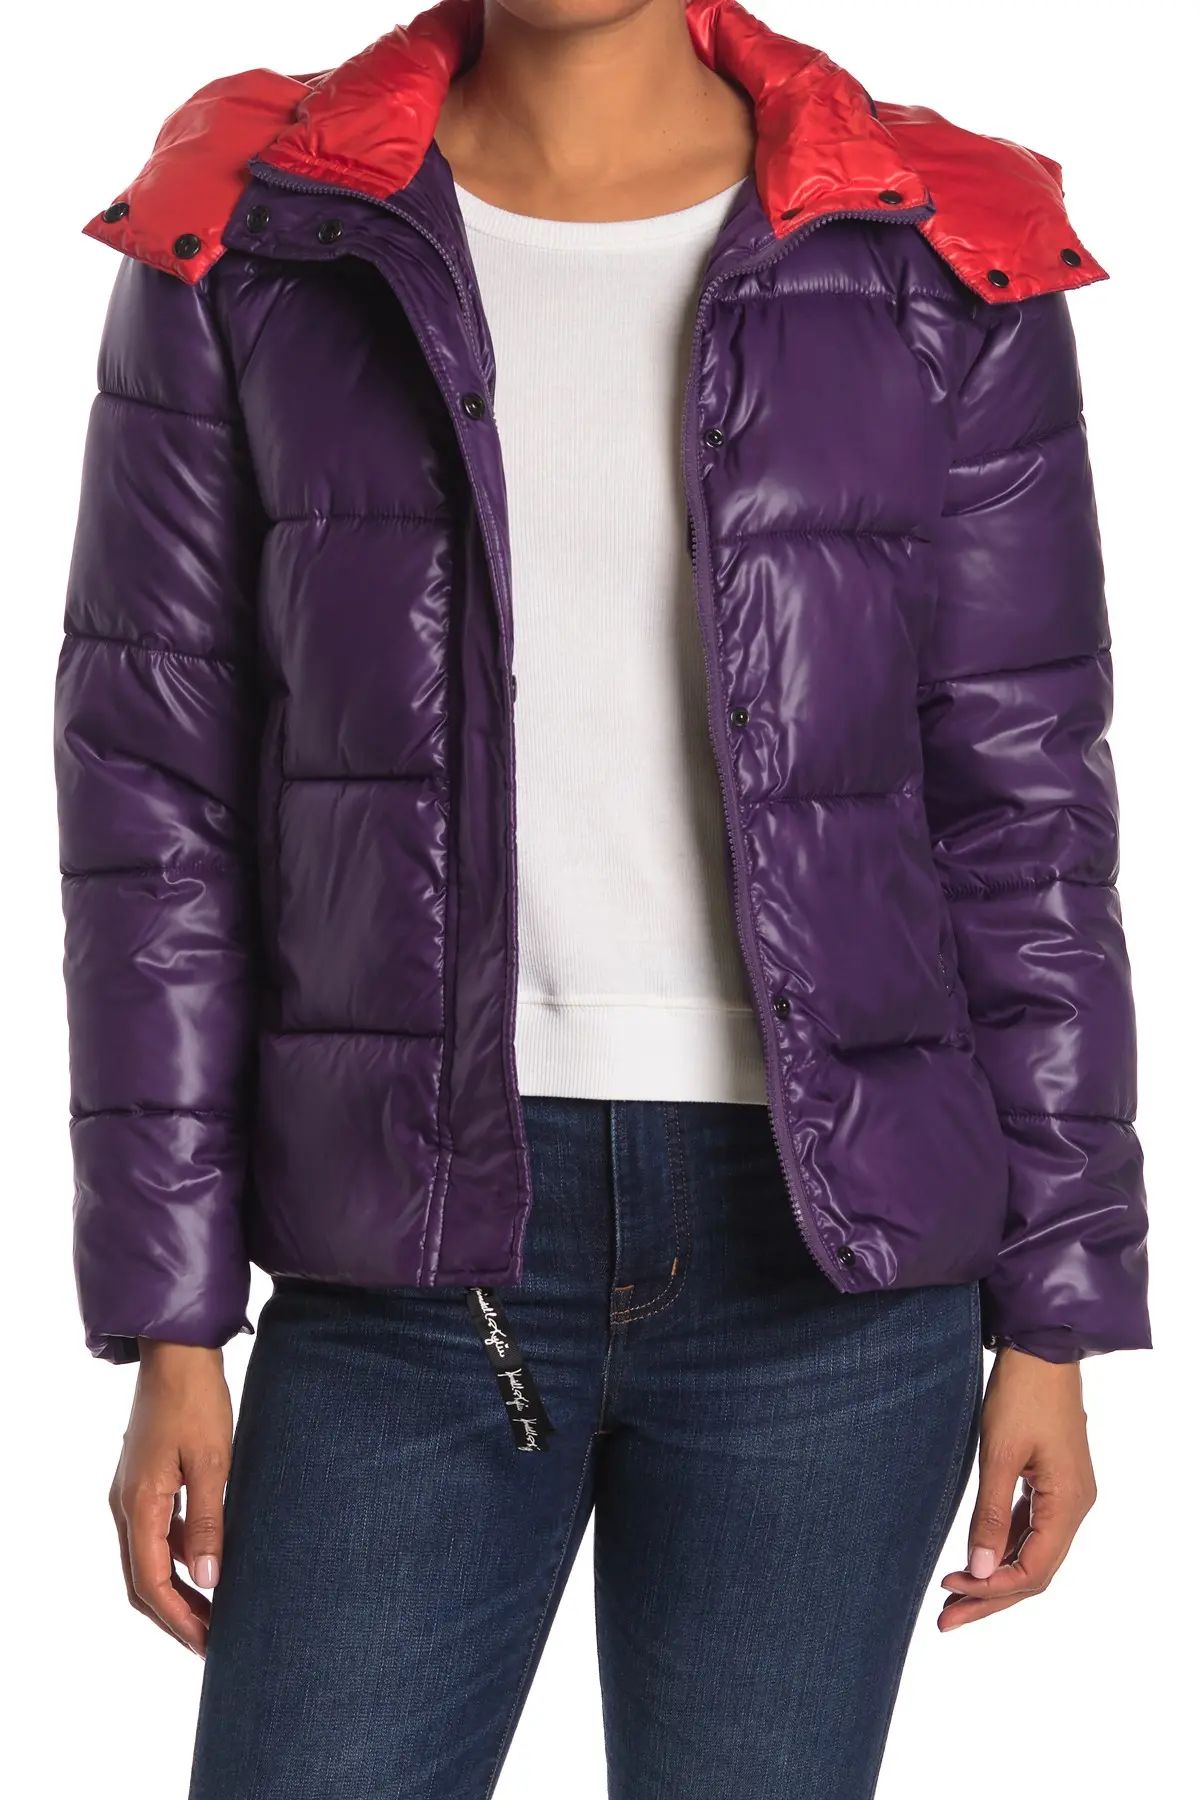 KENDALL AND KYLIE | Two-Tone Puffer Jacket | Nordstrom Rack | Nordstrom Rack